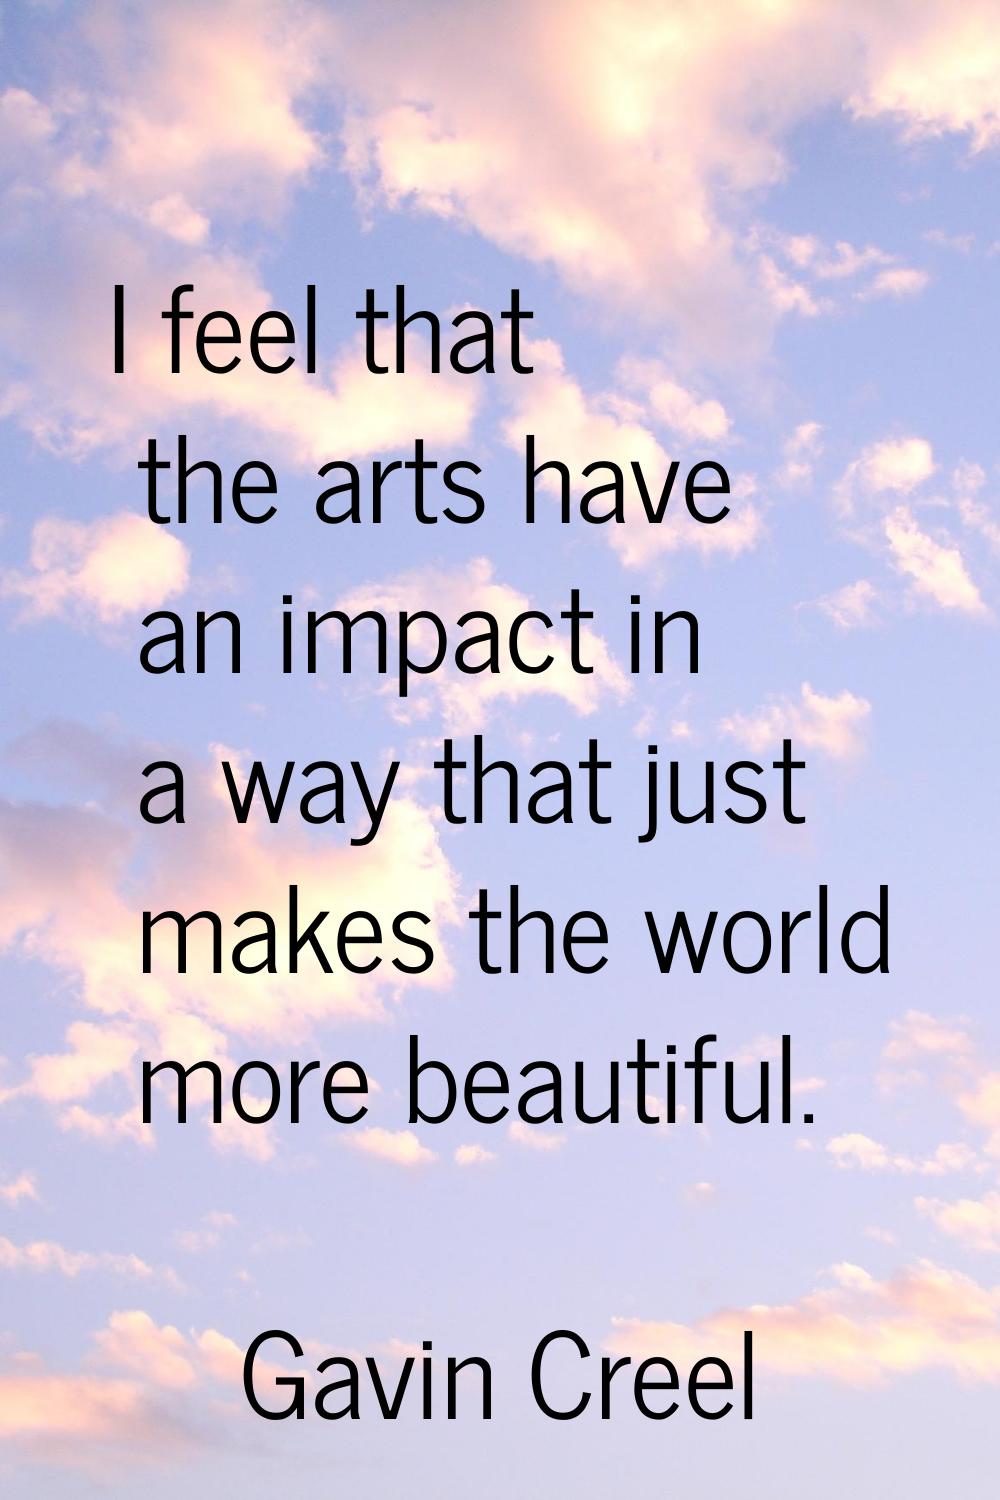 I feel that the arts have an impact in a way that just makes the world more beautiful.